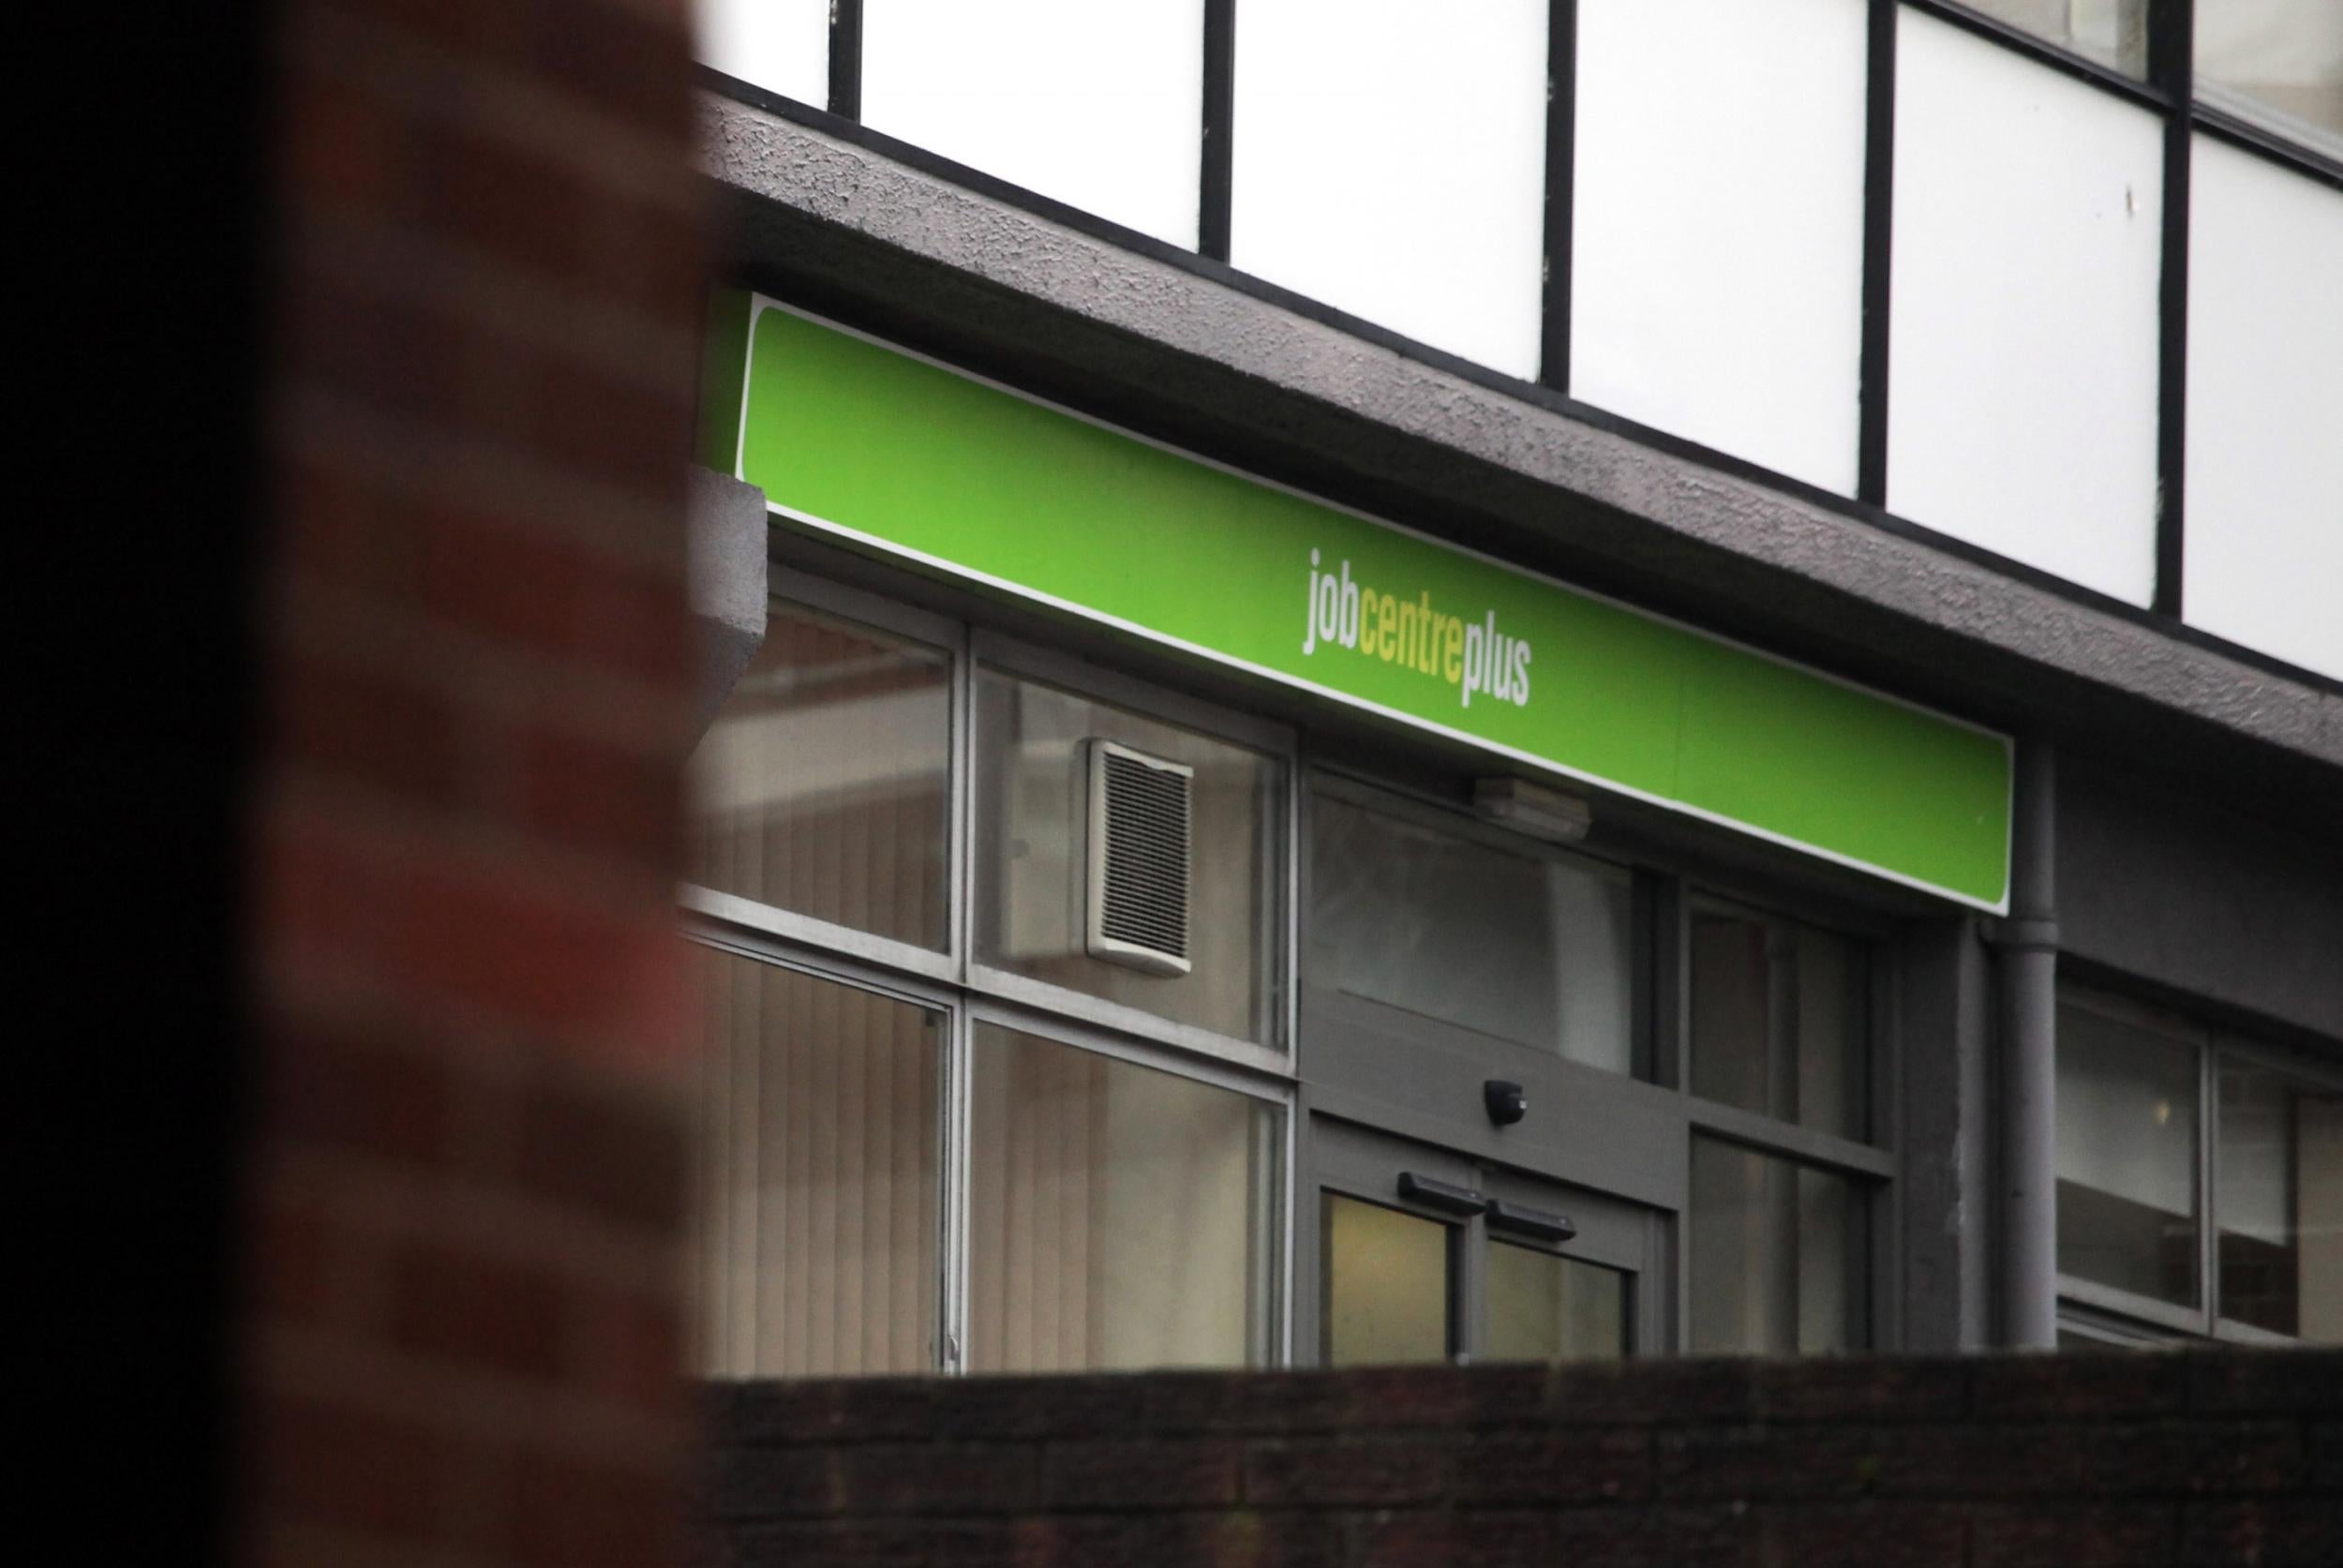 Meetings at Jobcentres were singled out as possibly counterproductive